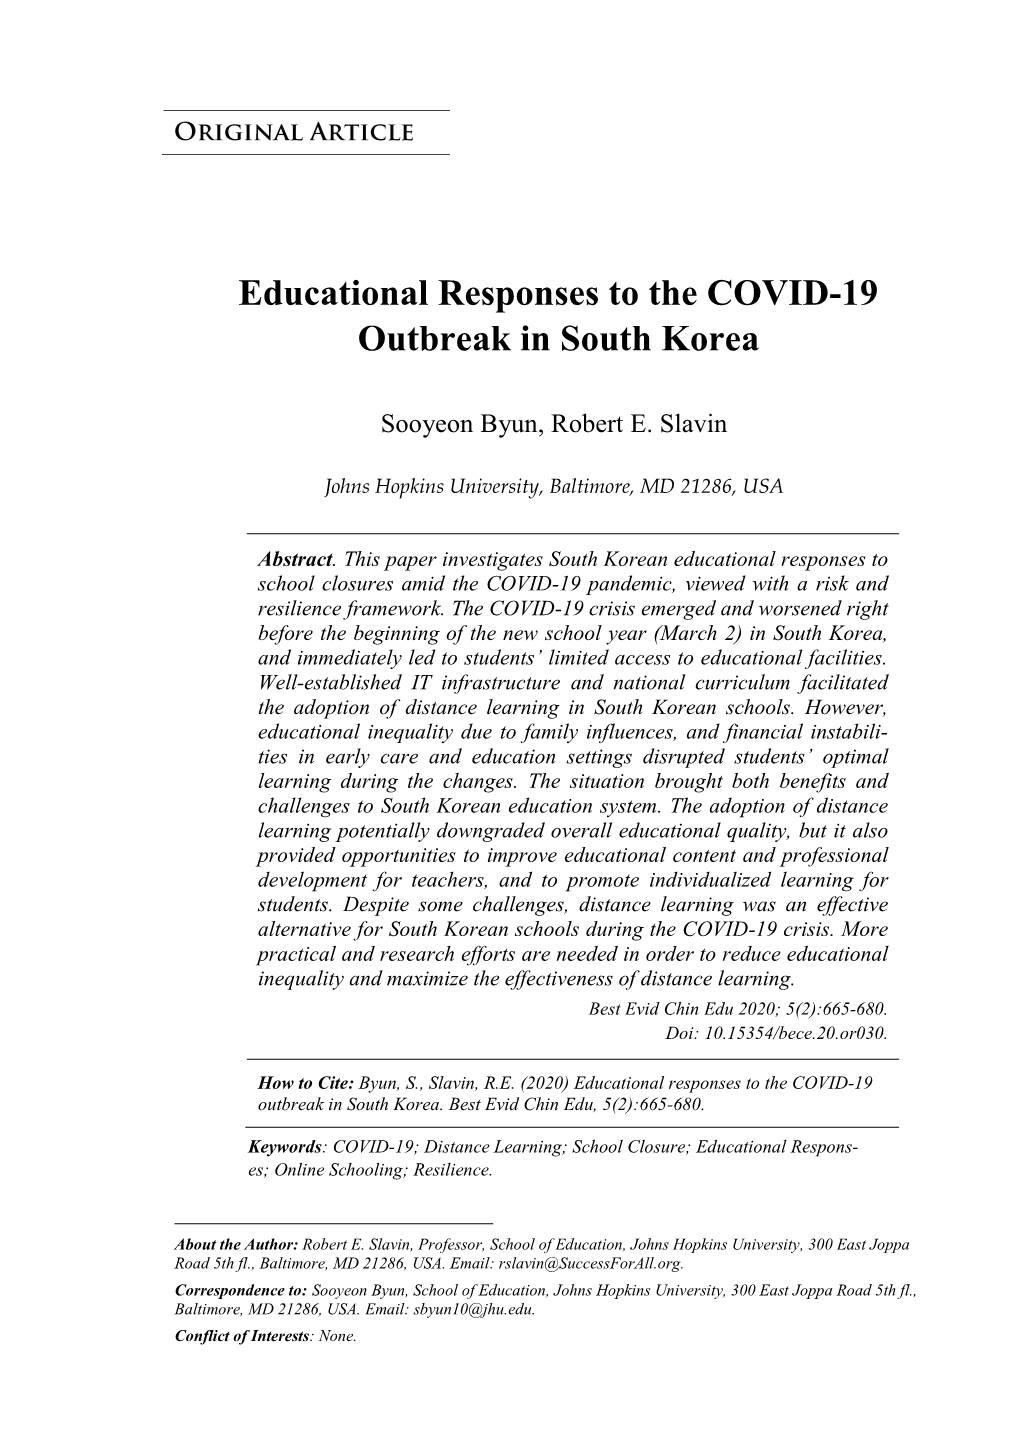 Educational Responses to the COVID-19 Outbreak in South Korea